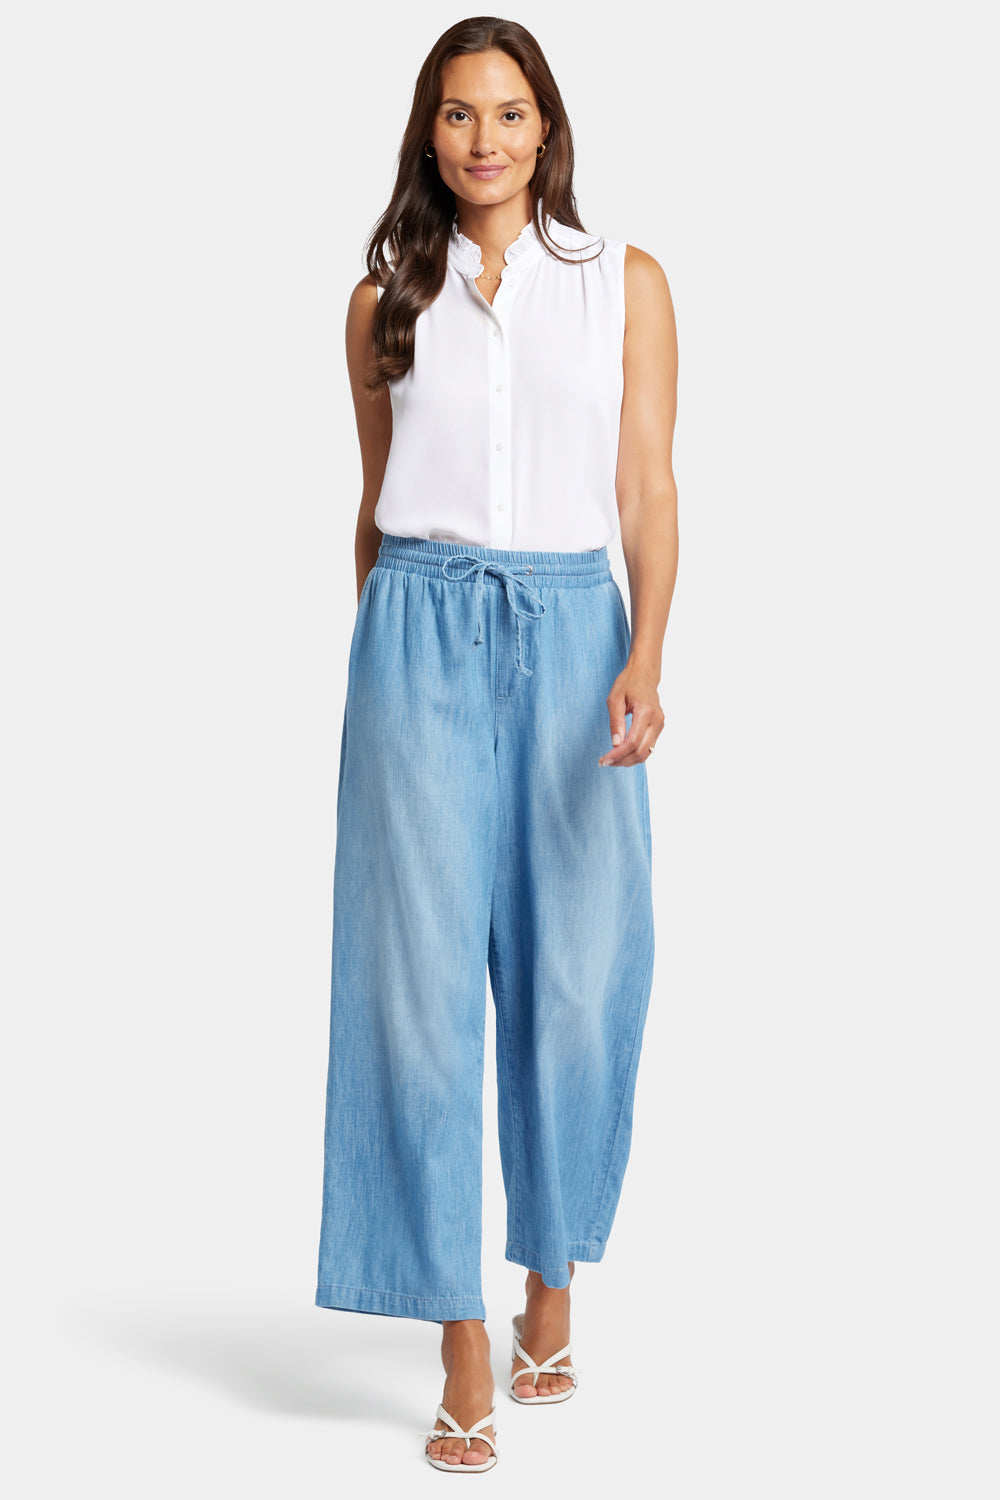 NYDJ Jayne Wide Leg Ankle Pull-On Pants With Super High Rise - Riviera Sky